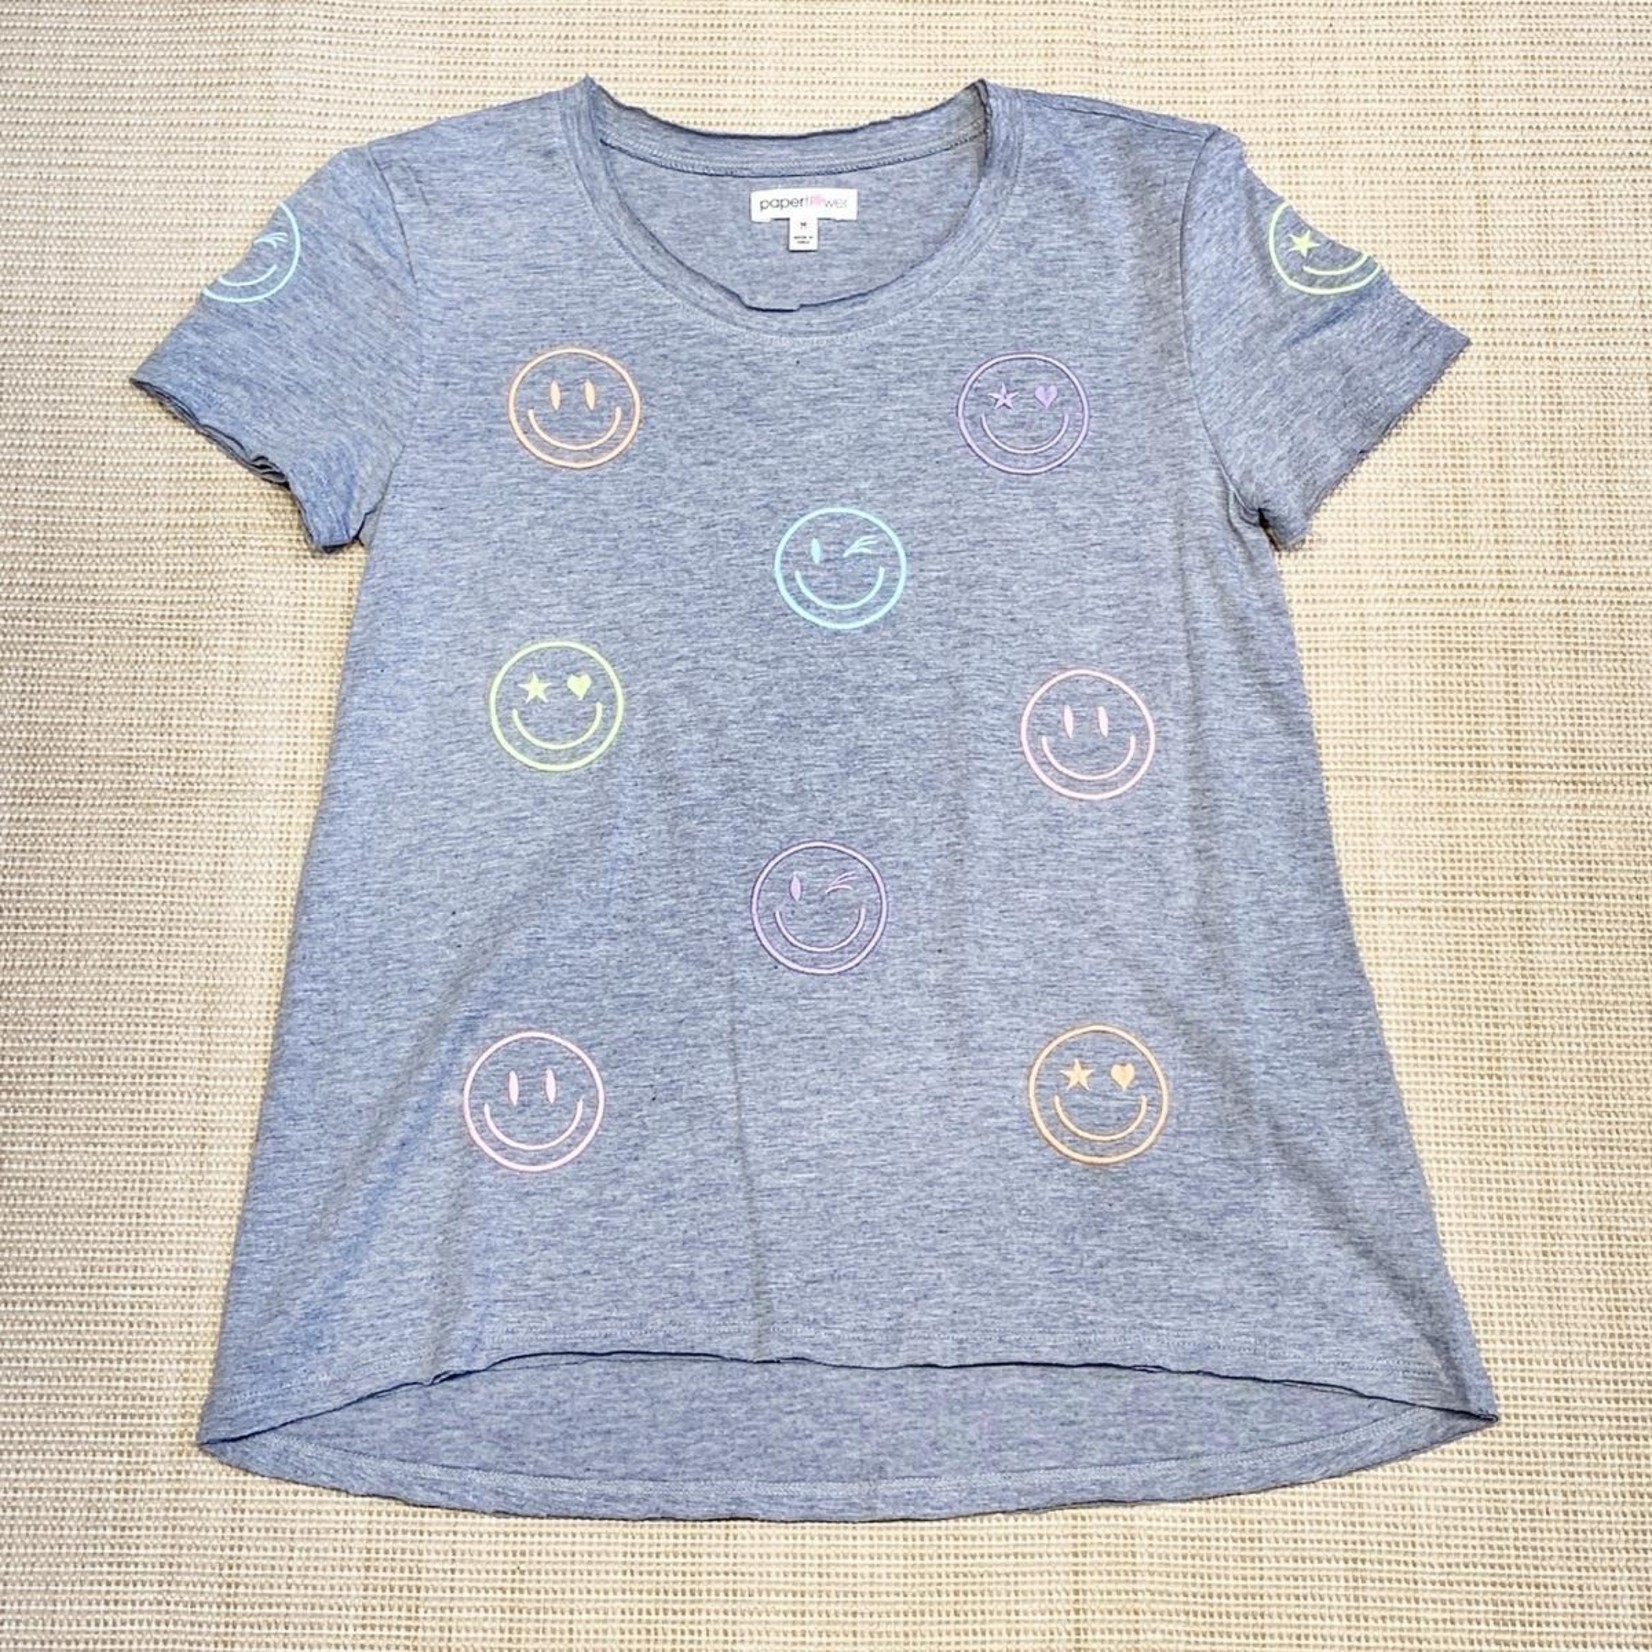 Paper Flower Smiley Face Top